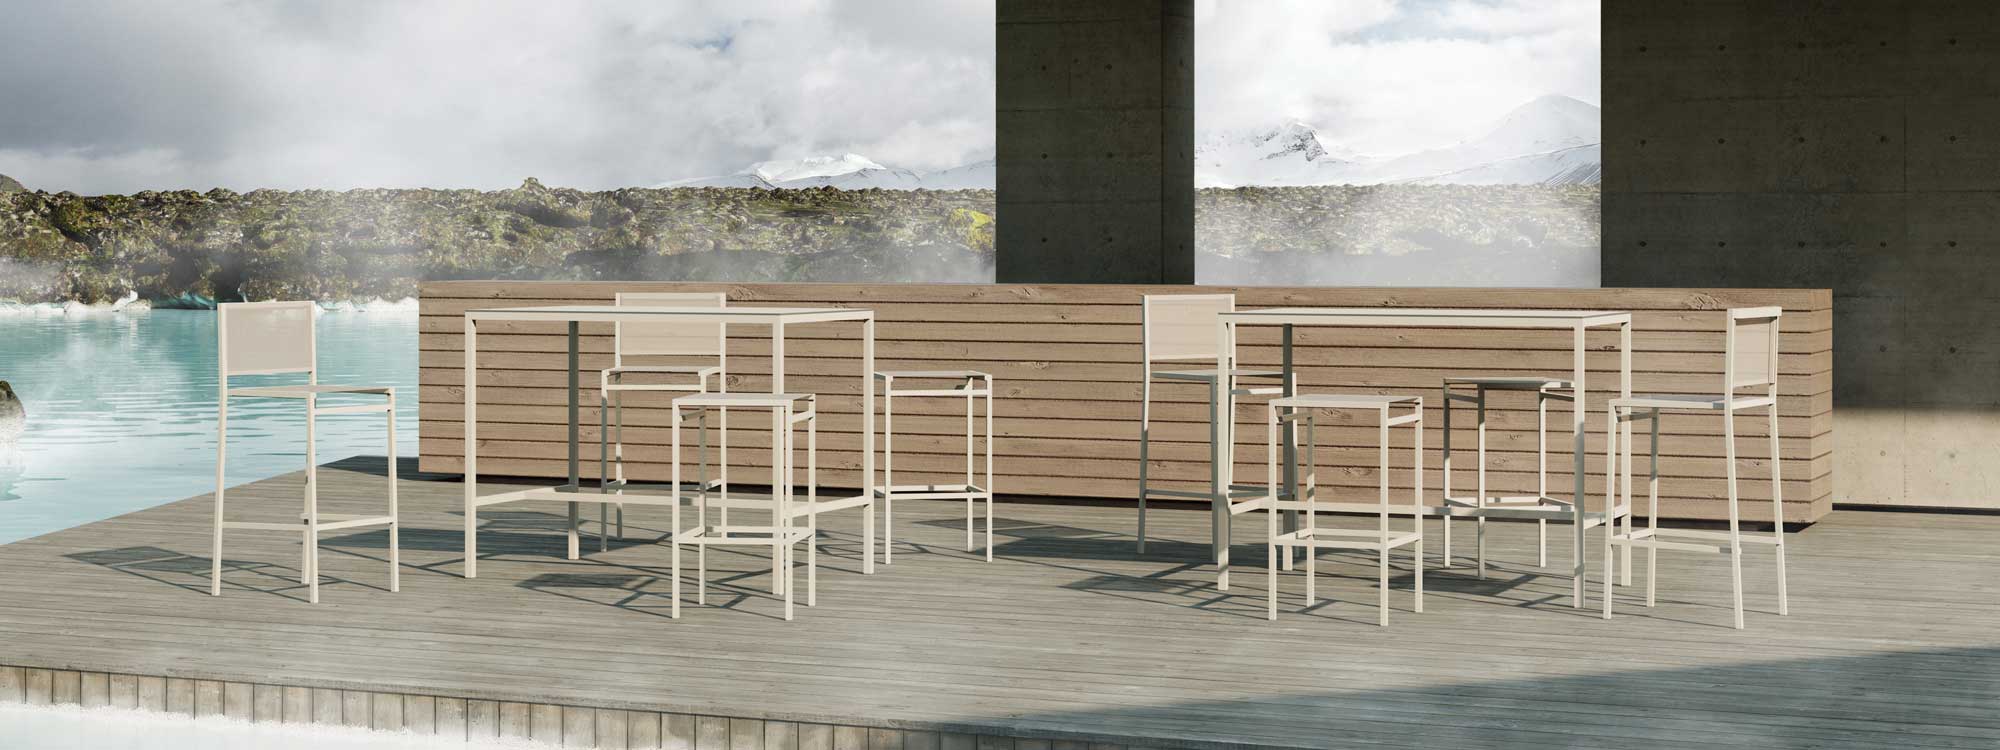 Image of Oiside 45 minimalist bar furniture on wooden decked poolside with snowy mountains in the background